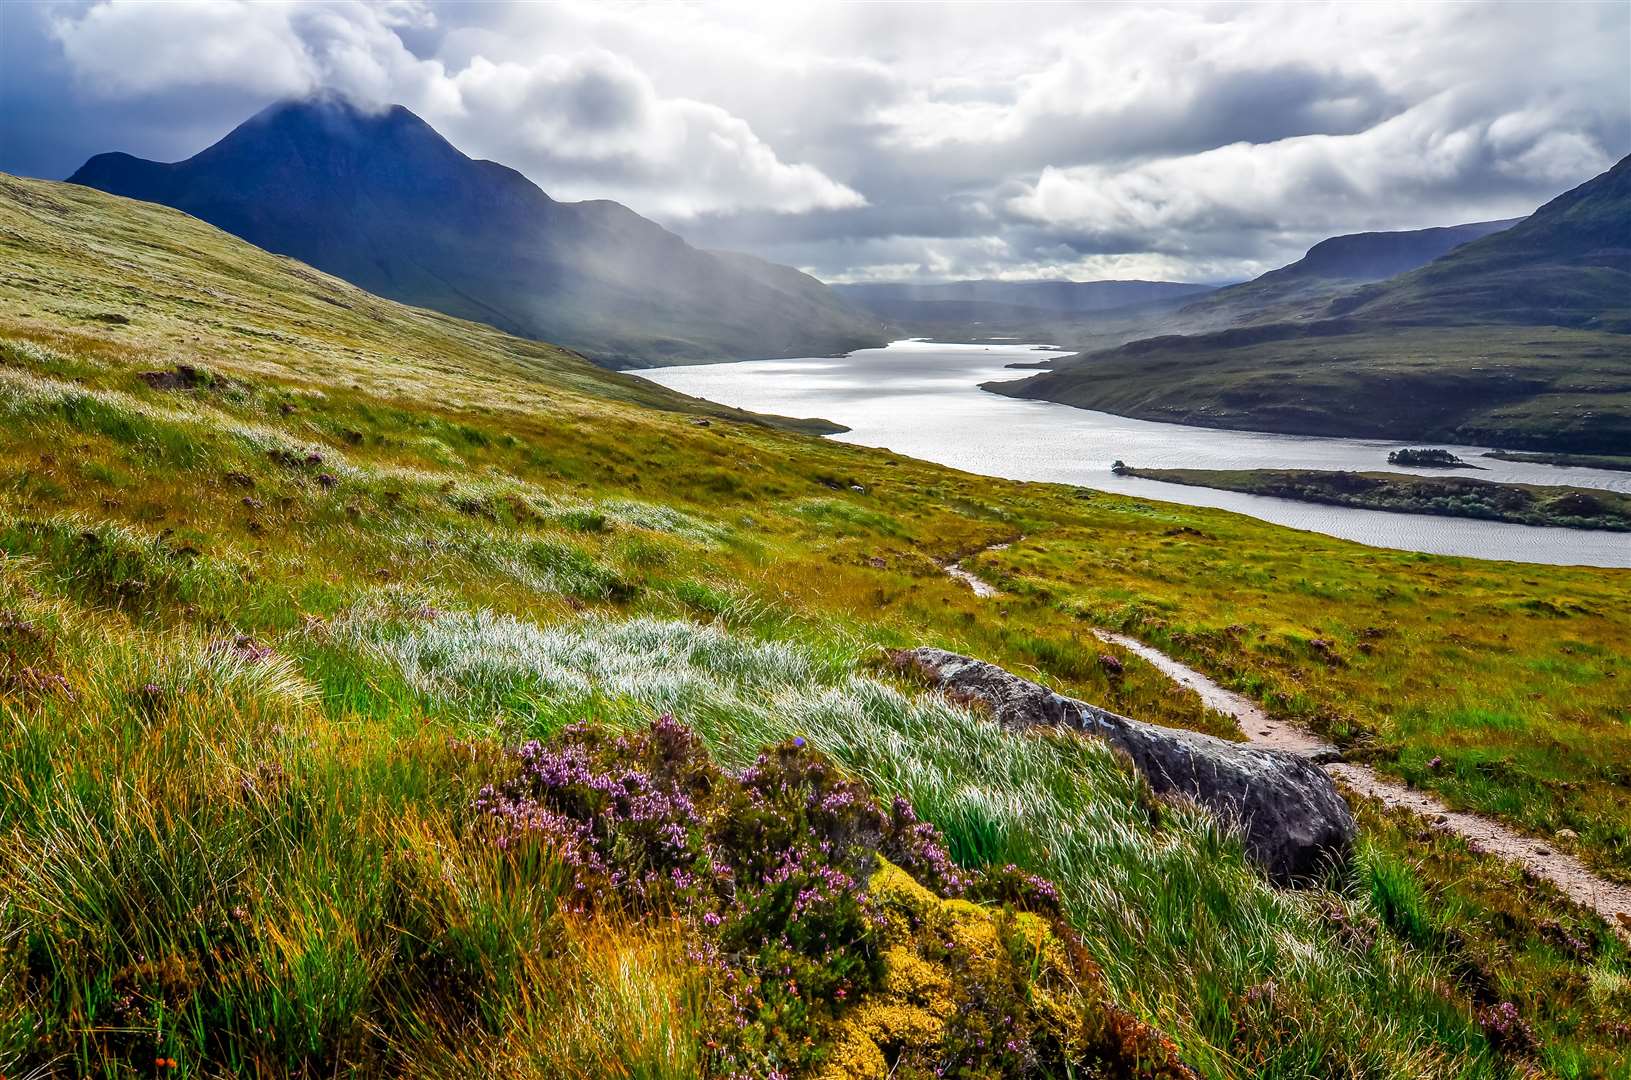 The best natural capital project award recognises the importance of protecting the special environment of the Highlands and Islands.